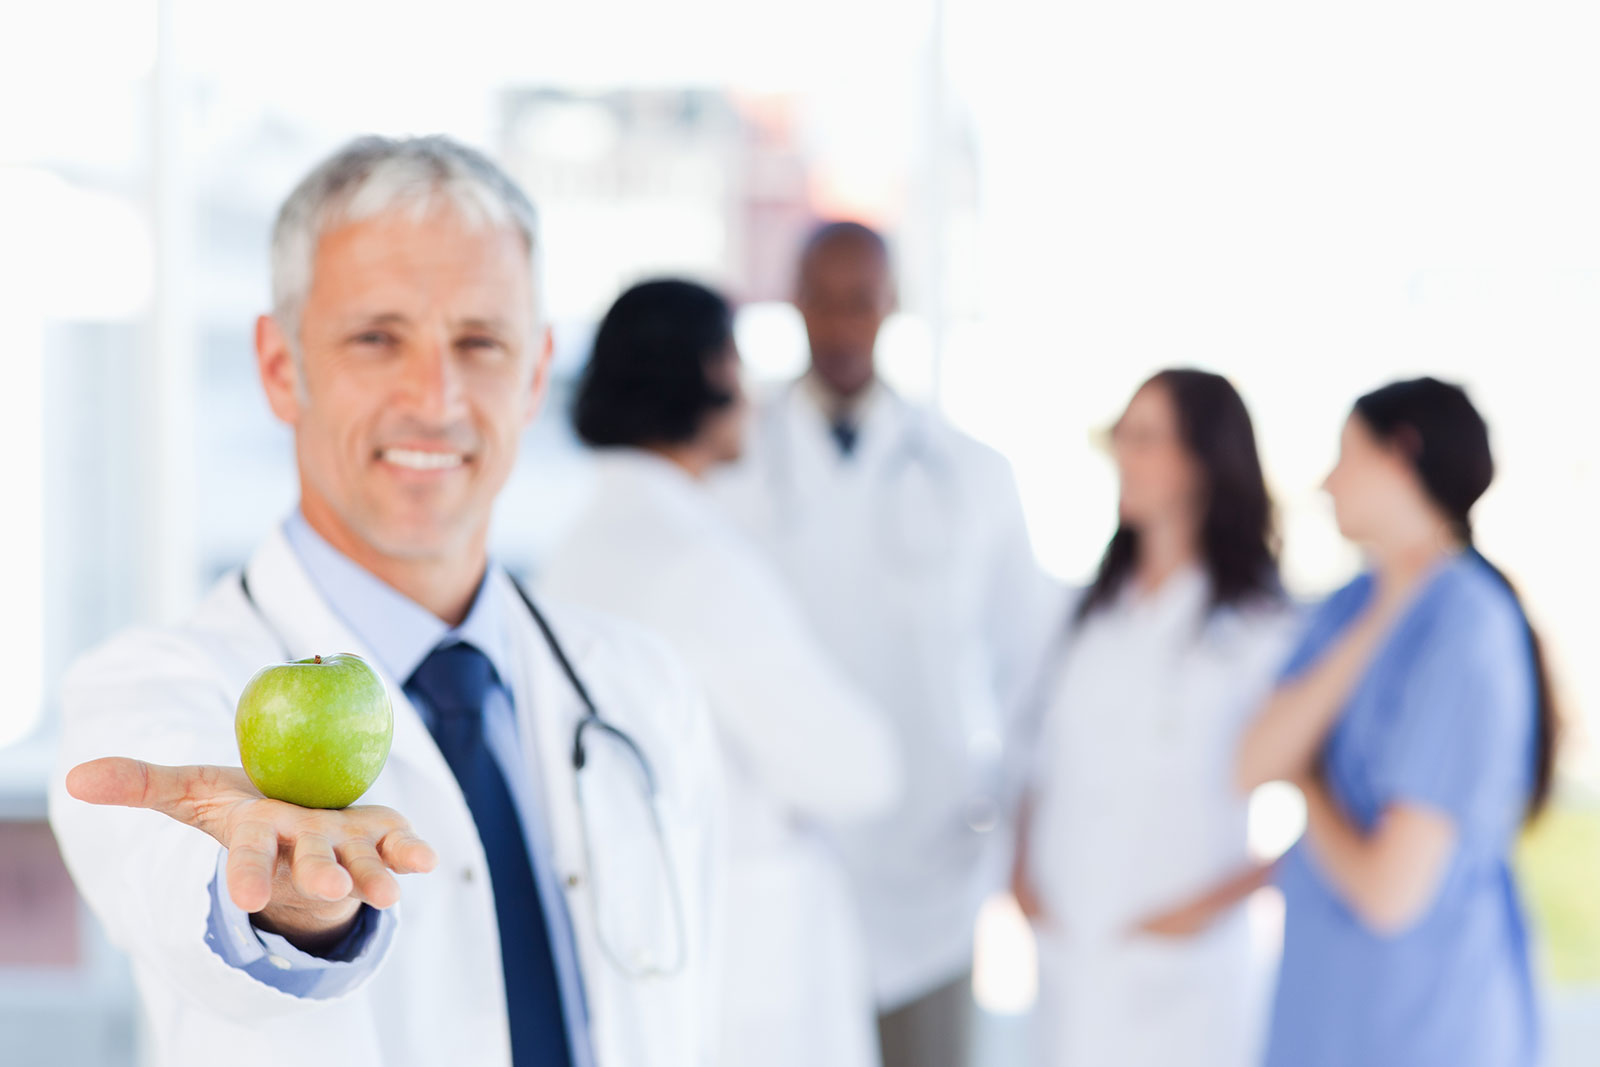 A doctor shows an apple to illustrate staying healthy and the relation between patient and the doctor.